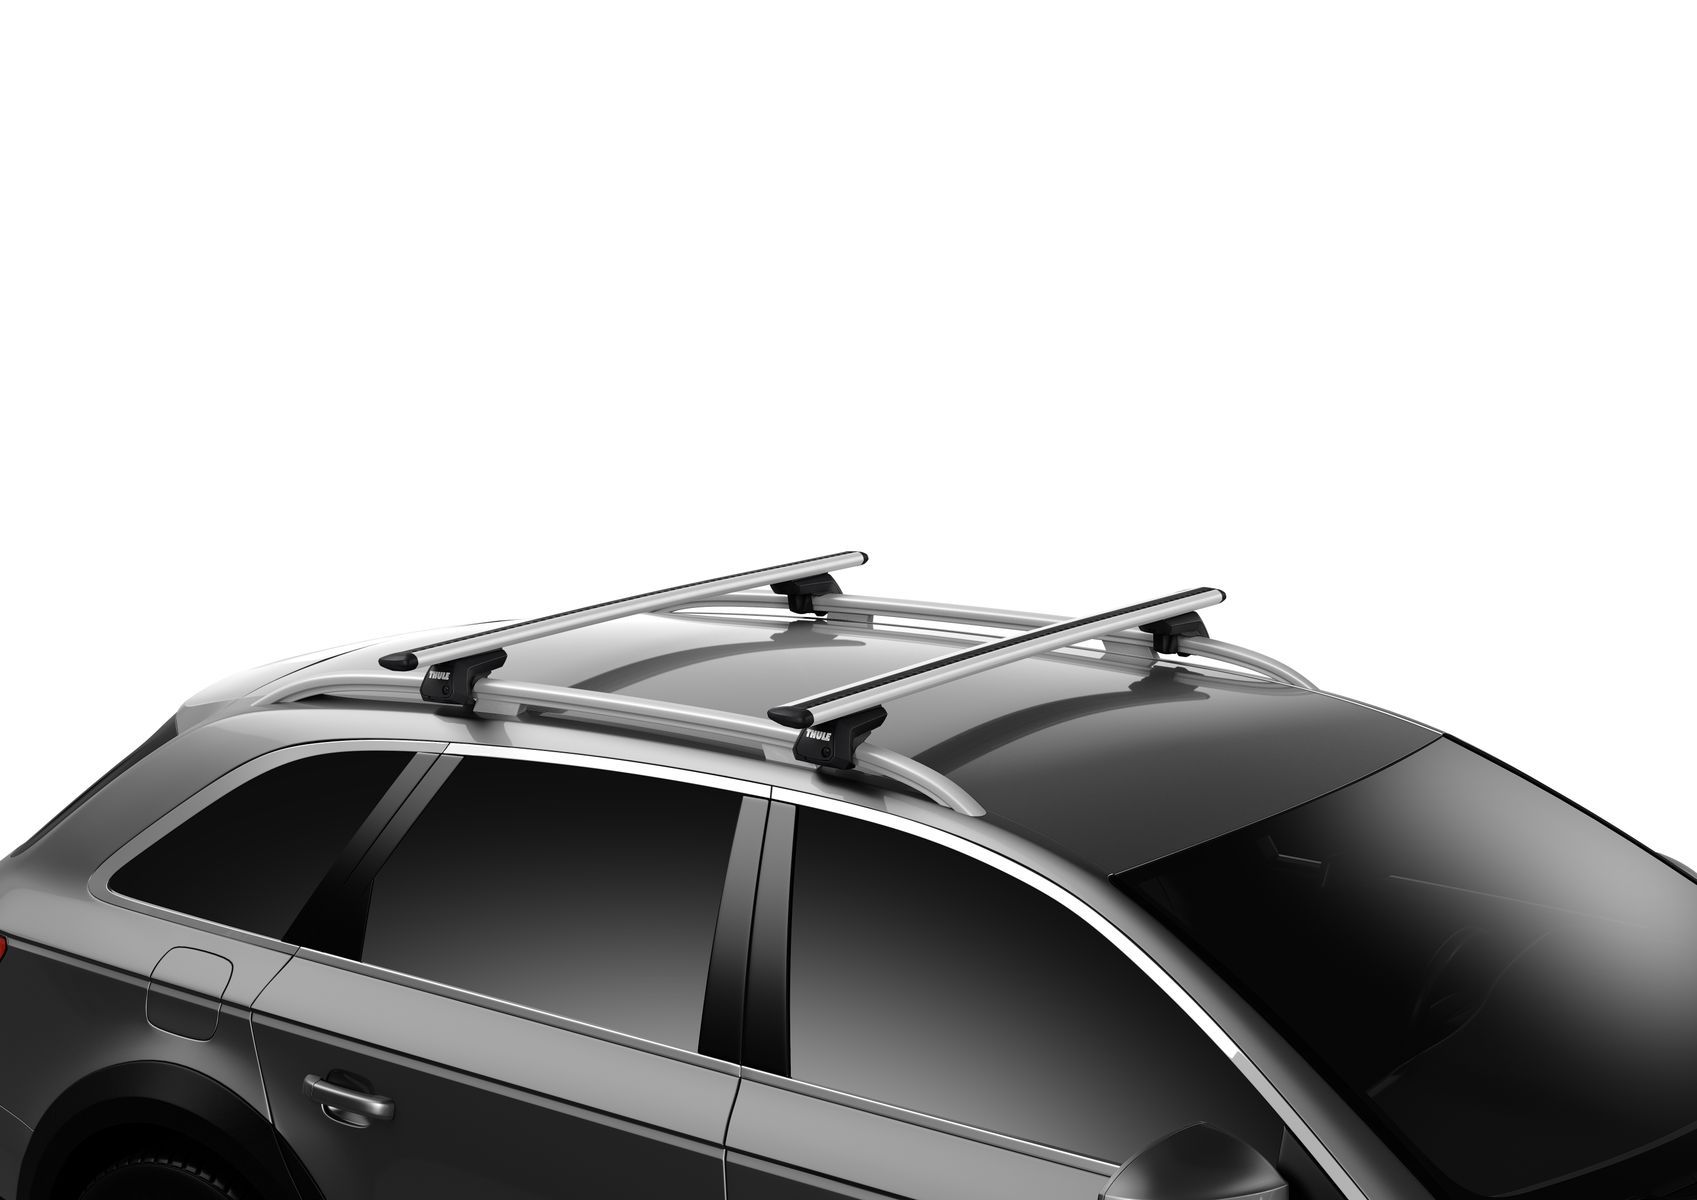 Thule Roof Rack System Fit Kit 